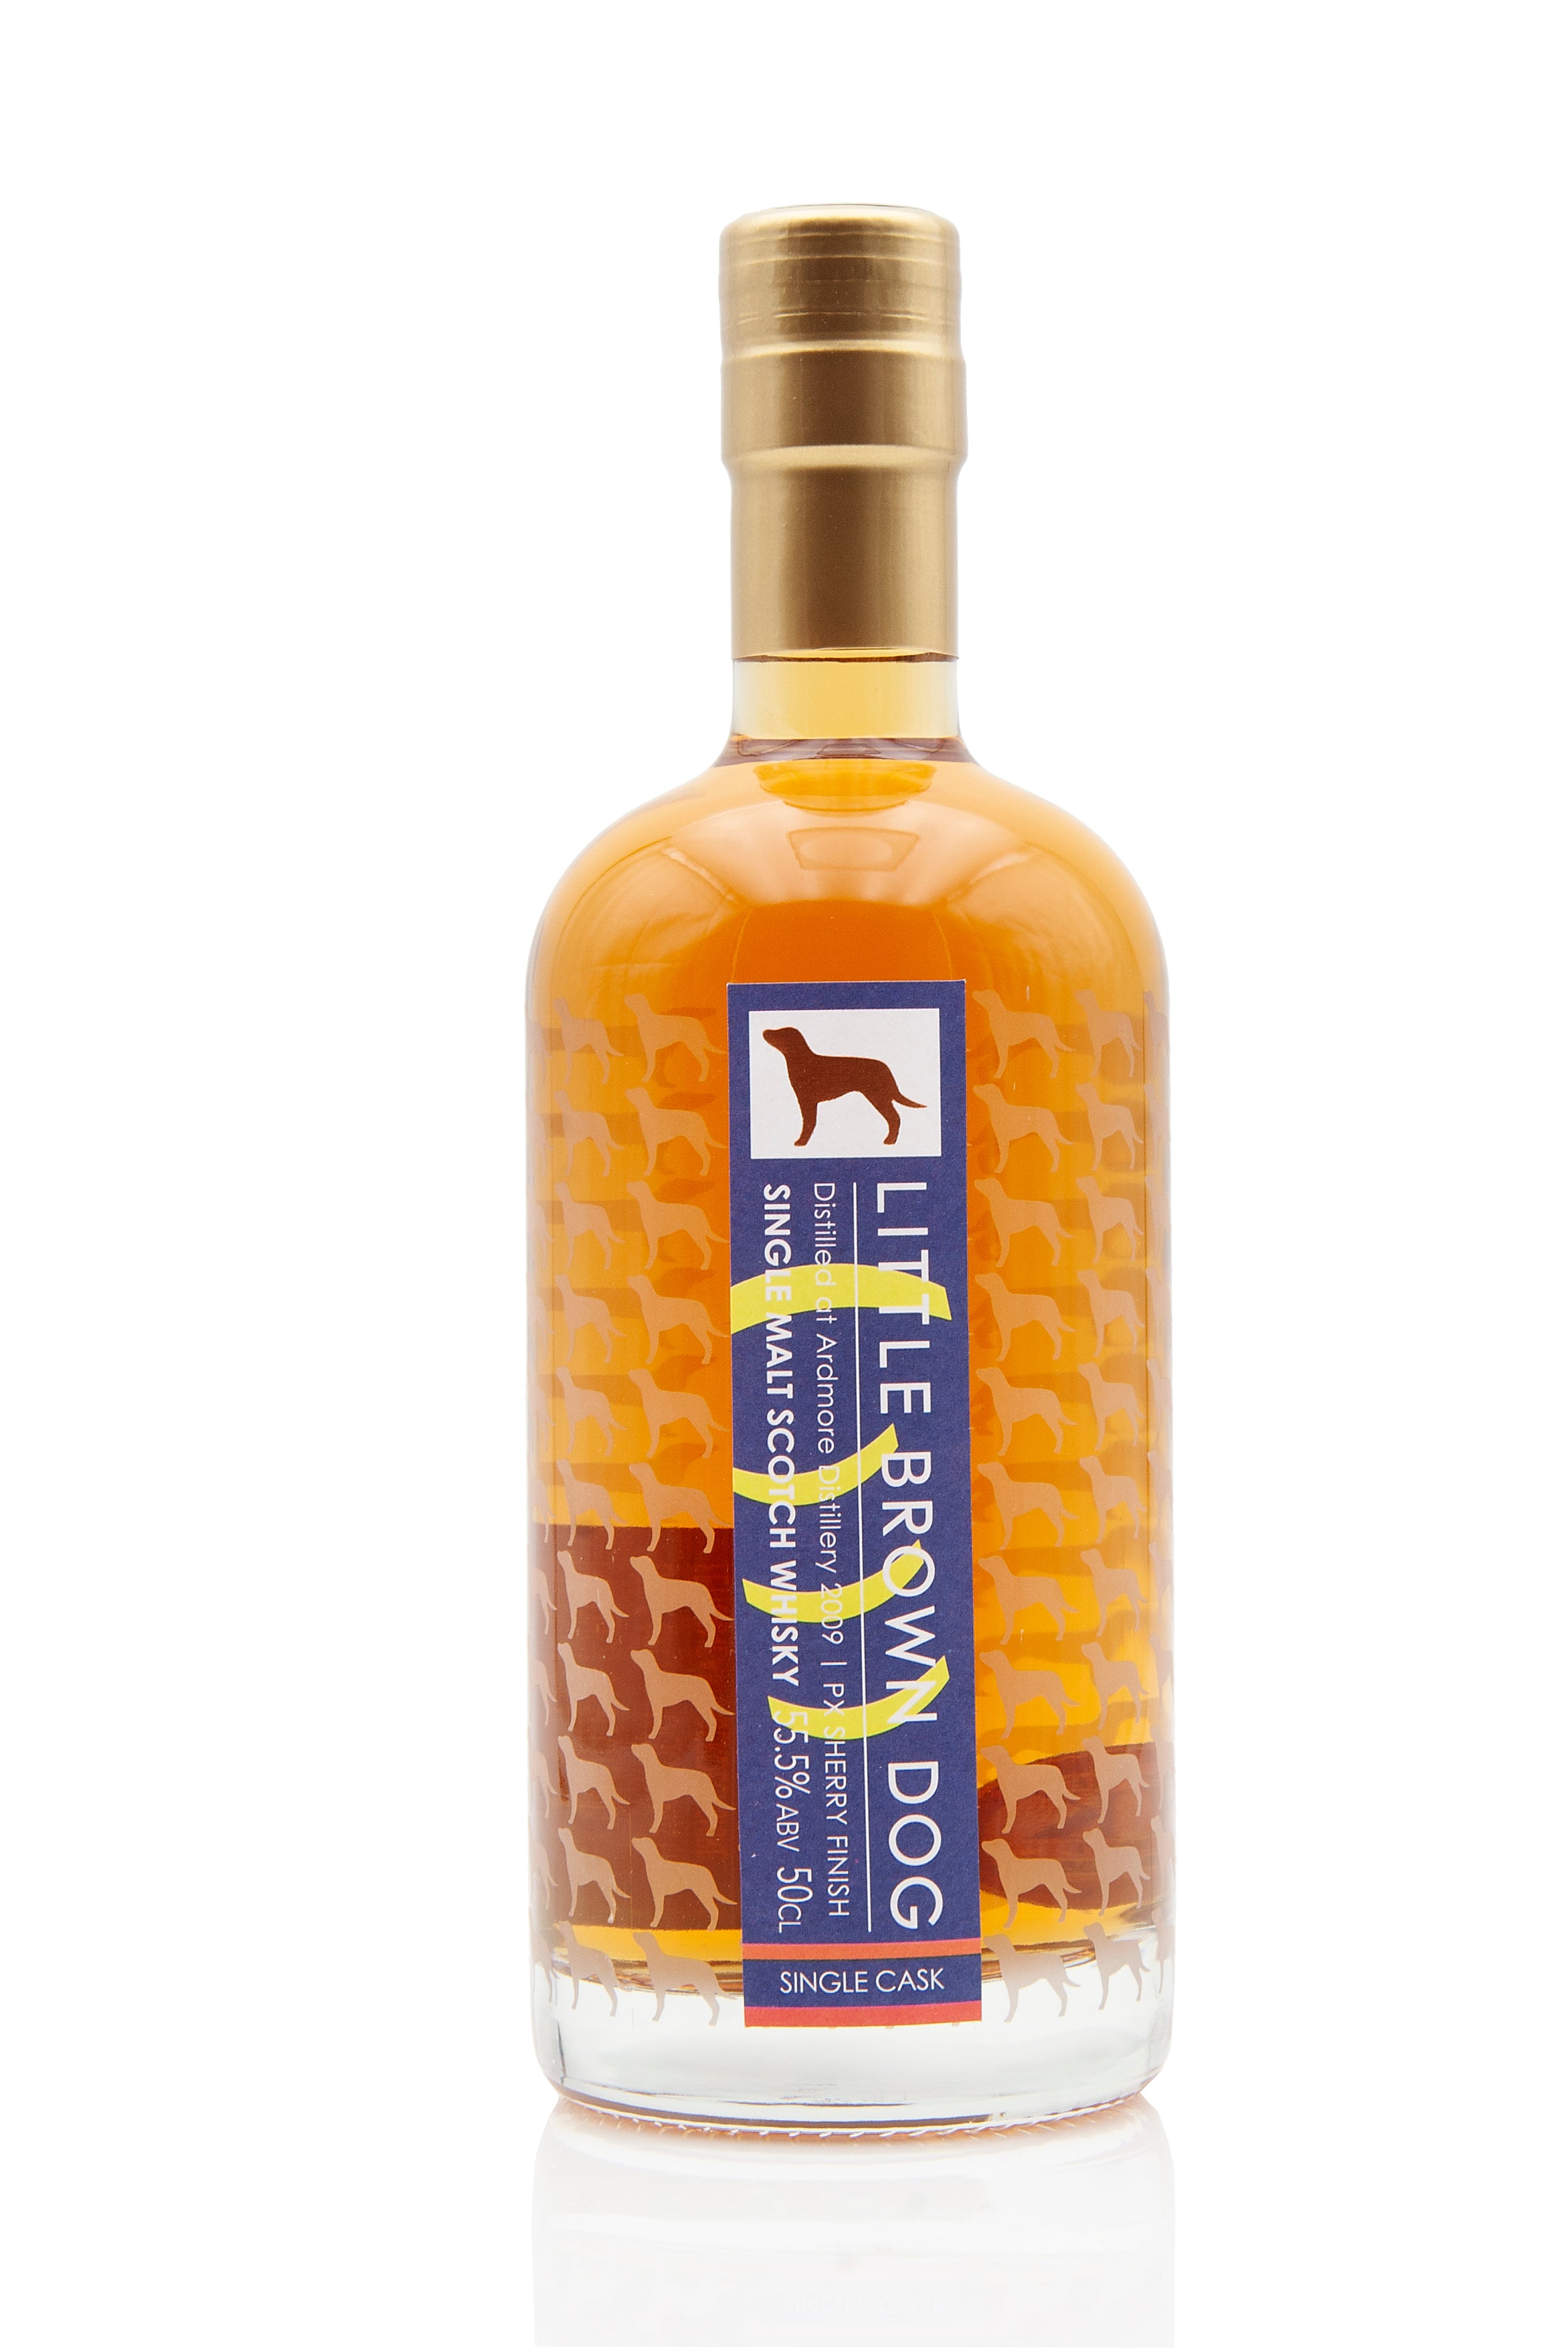 Ardmore 2009 - PX Sherry Finish | Little Brown Dog Spirits | Abbey Whisky Online